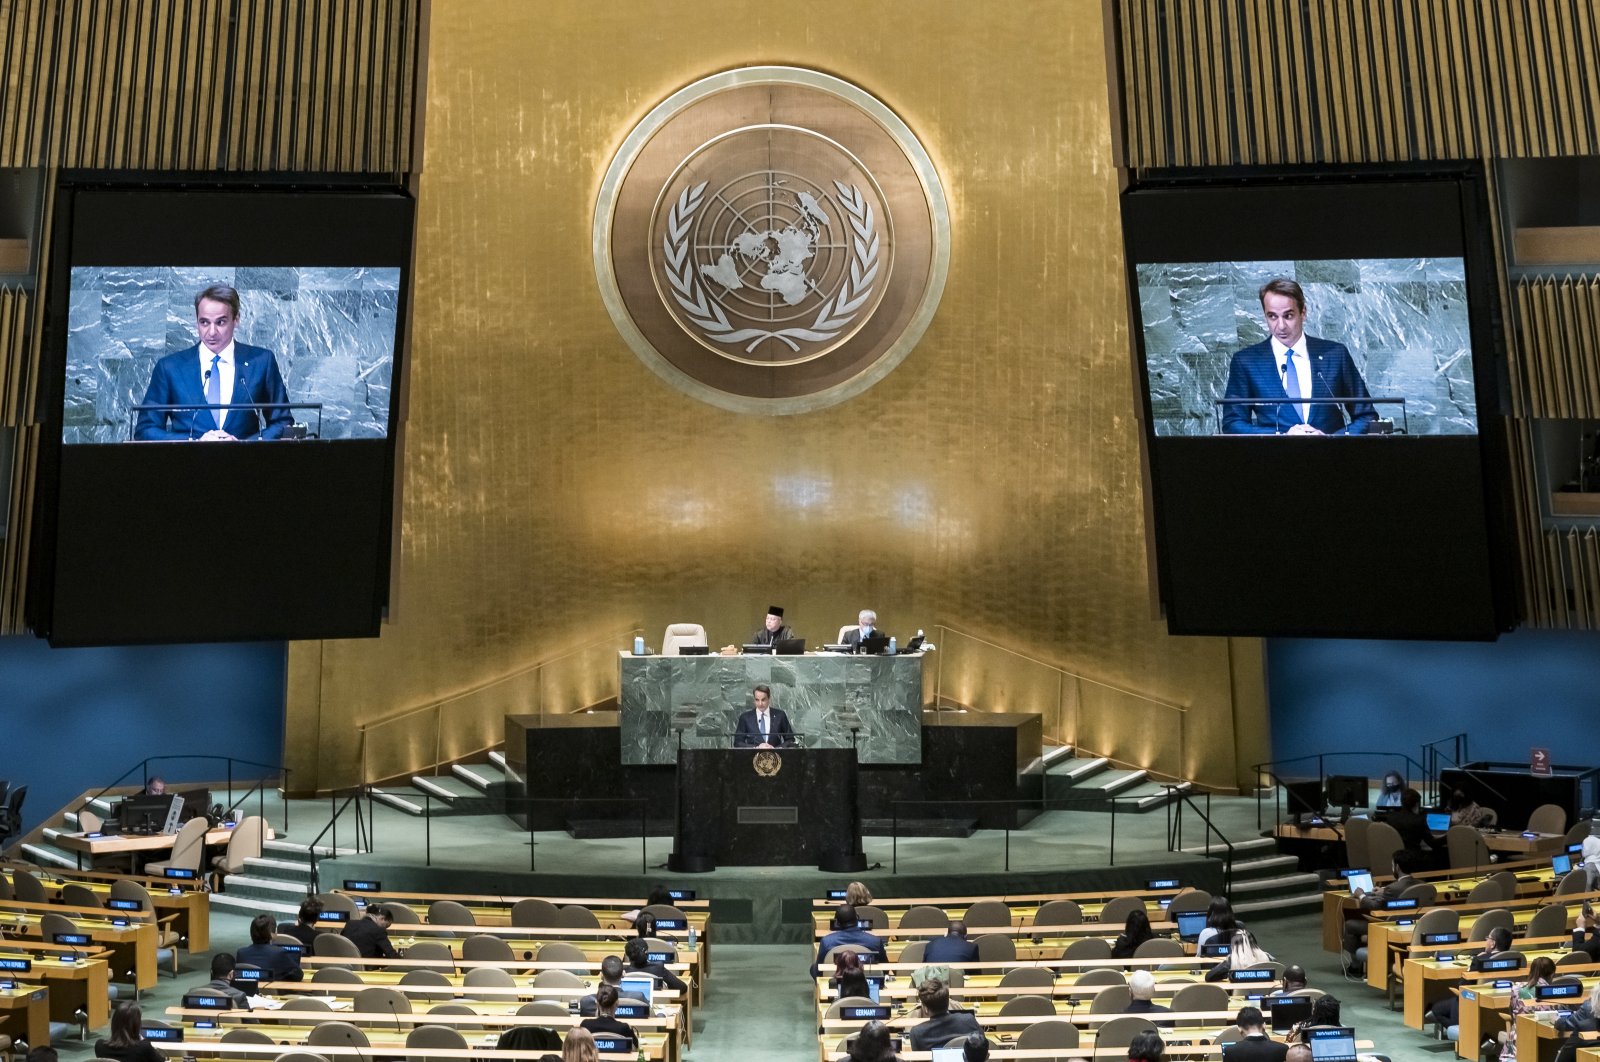 Greek Prime Minister Kyriakos Mitsotakis addresses the 77th session of the U.N. General Assembly, in the General Assembly hall at United Nations Headquarters, New York, U.S., Sept. 23 2022. (EPA Photo)